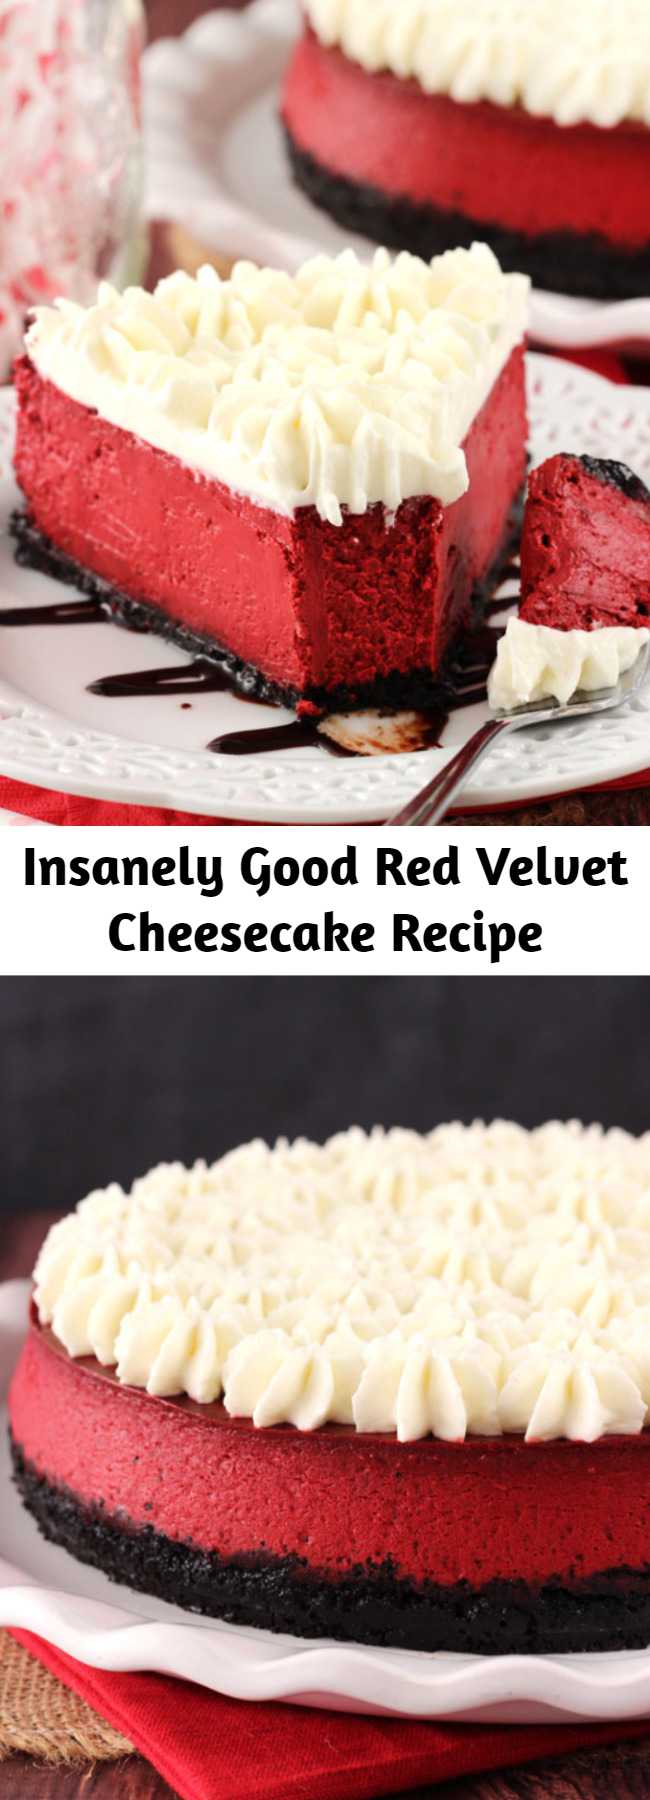 Insanely Good Red Velvet Cheesecake Recipe - This Red Velvet Cheesecake is one of the smoothest and creamiest cheesecakes I’ve ever made. It’s insanely good and has that light tanginess that’s so loved in a red velvet dessert. The cream cheese whipped cream topping finishes it off perfectly!